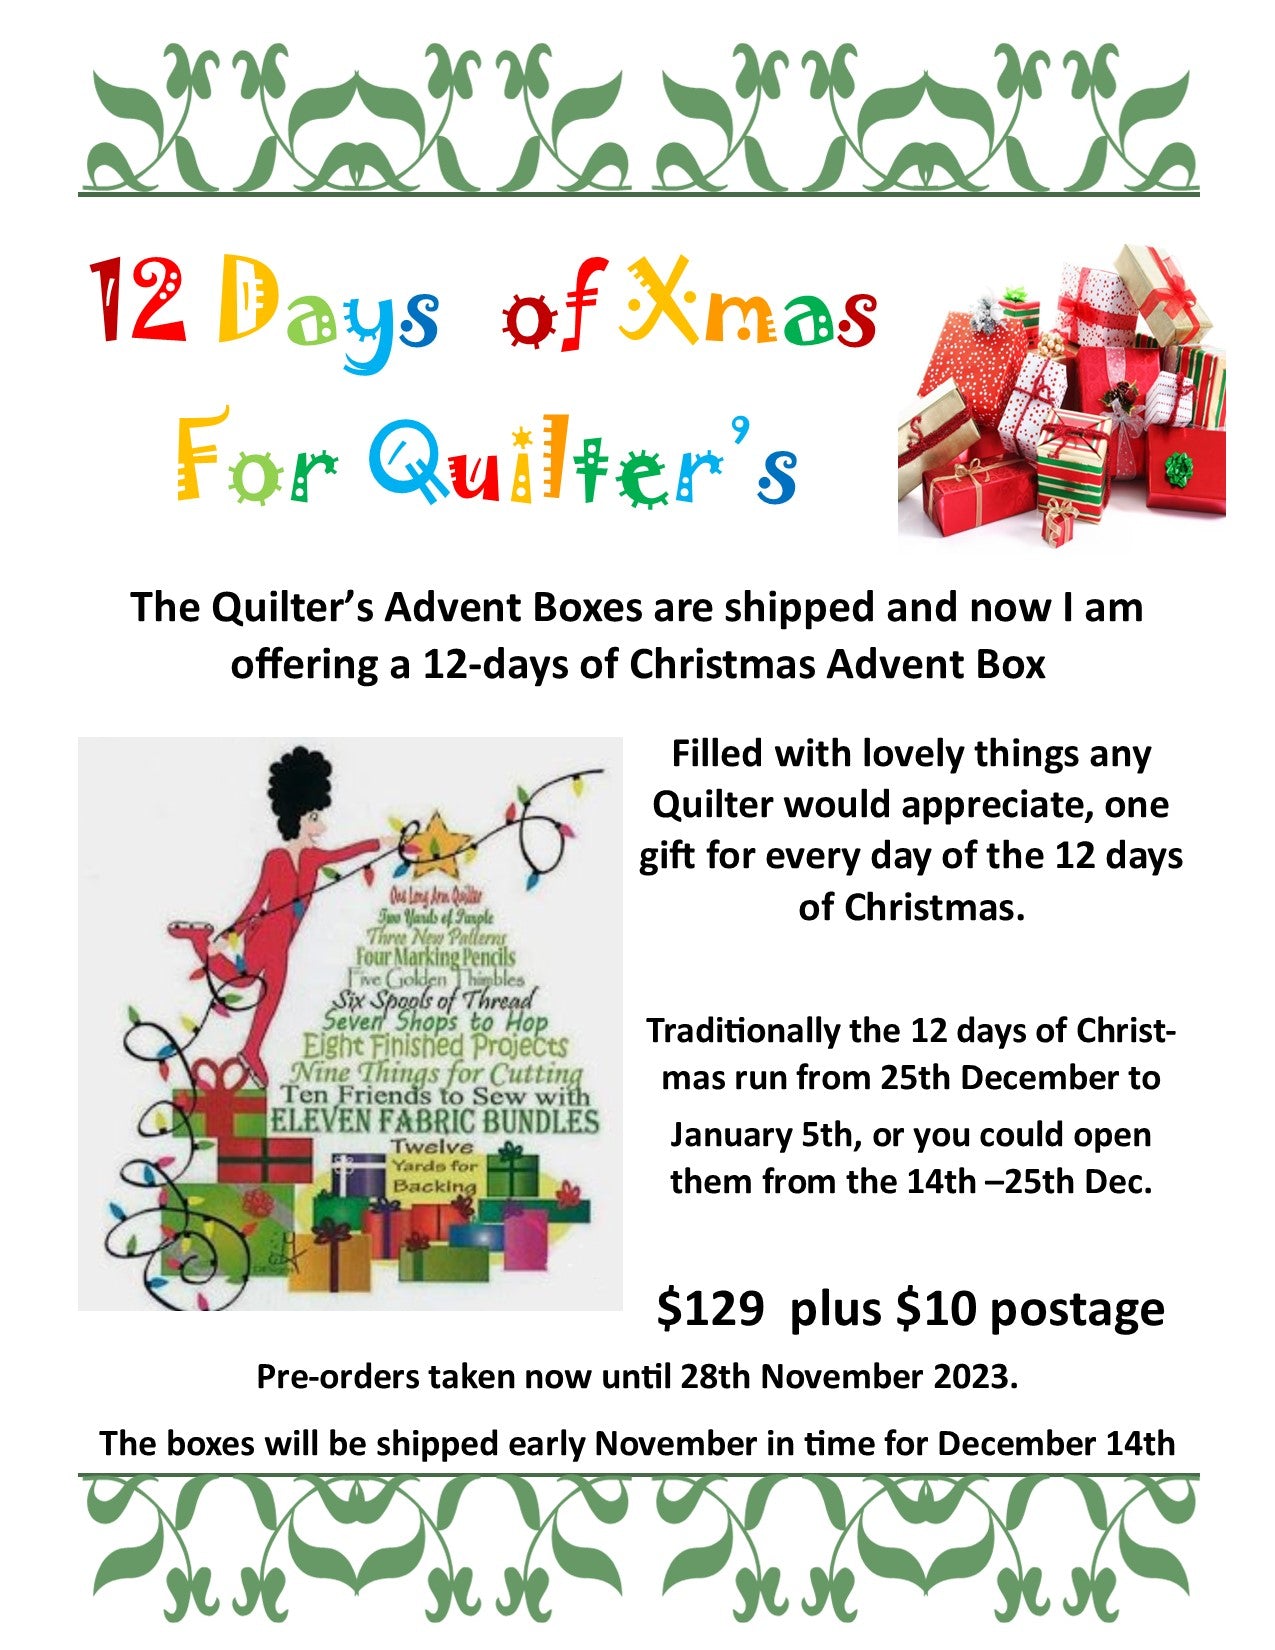 12 days of Xmas for Quilters